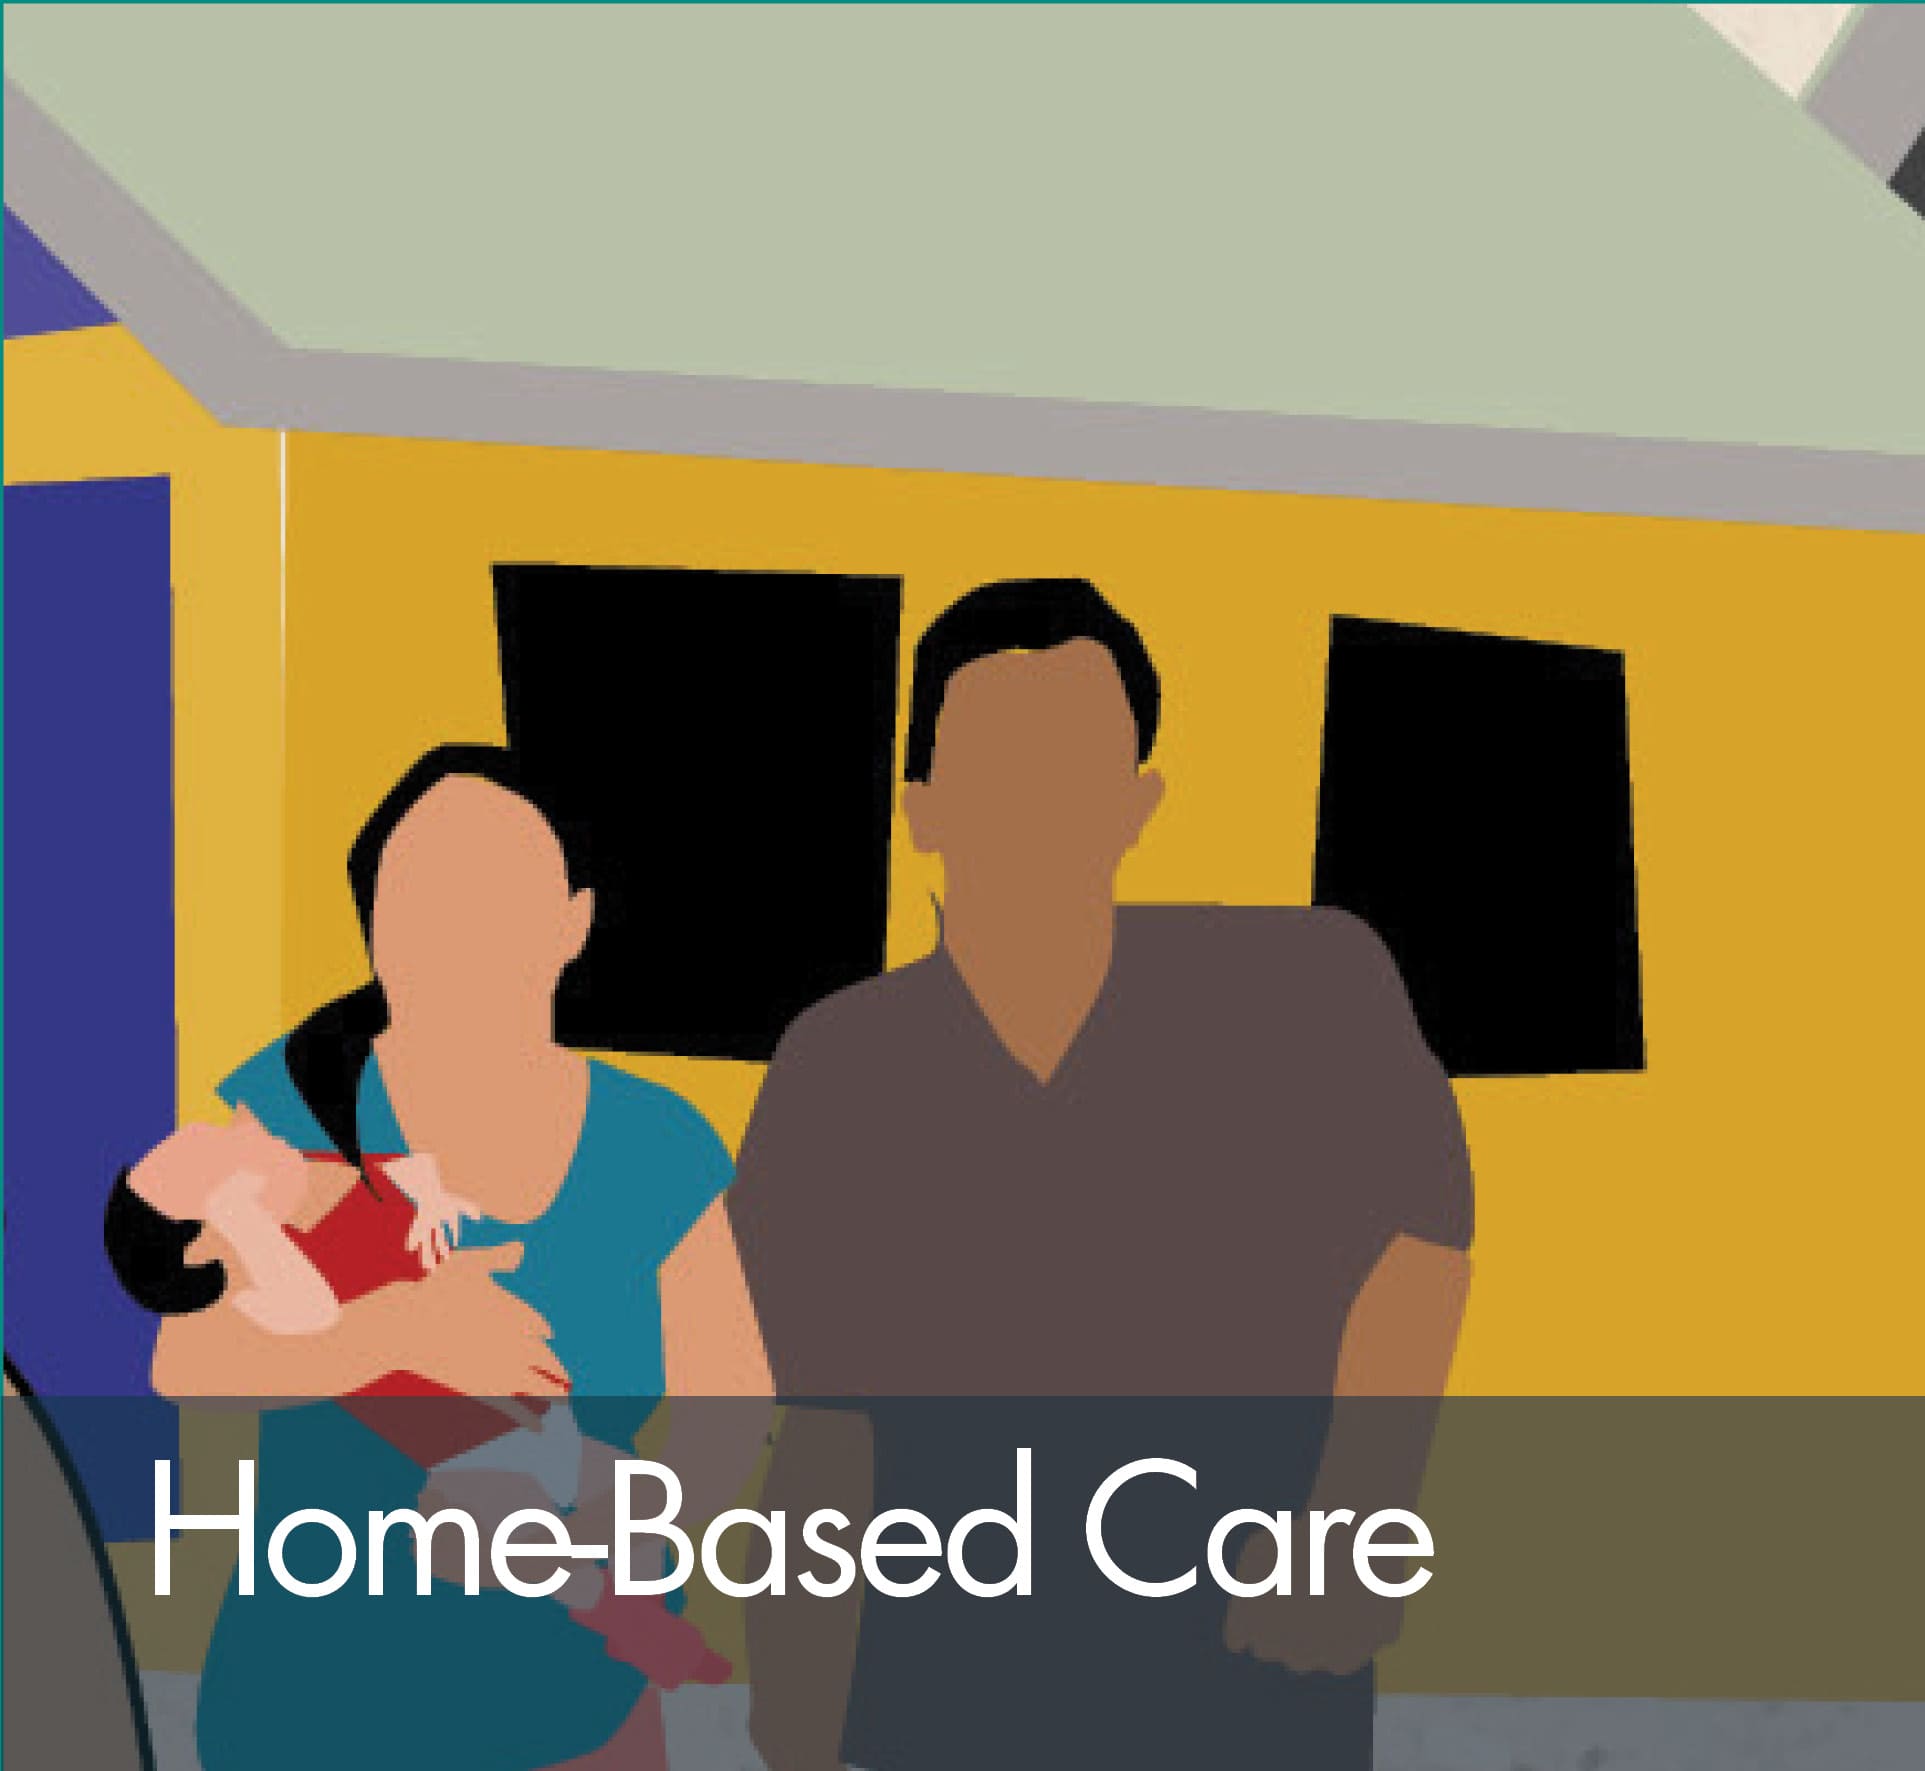 Home-Based Care